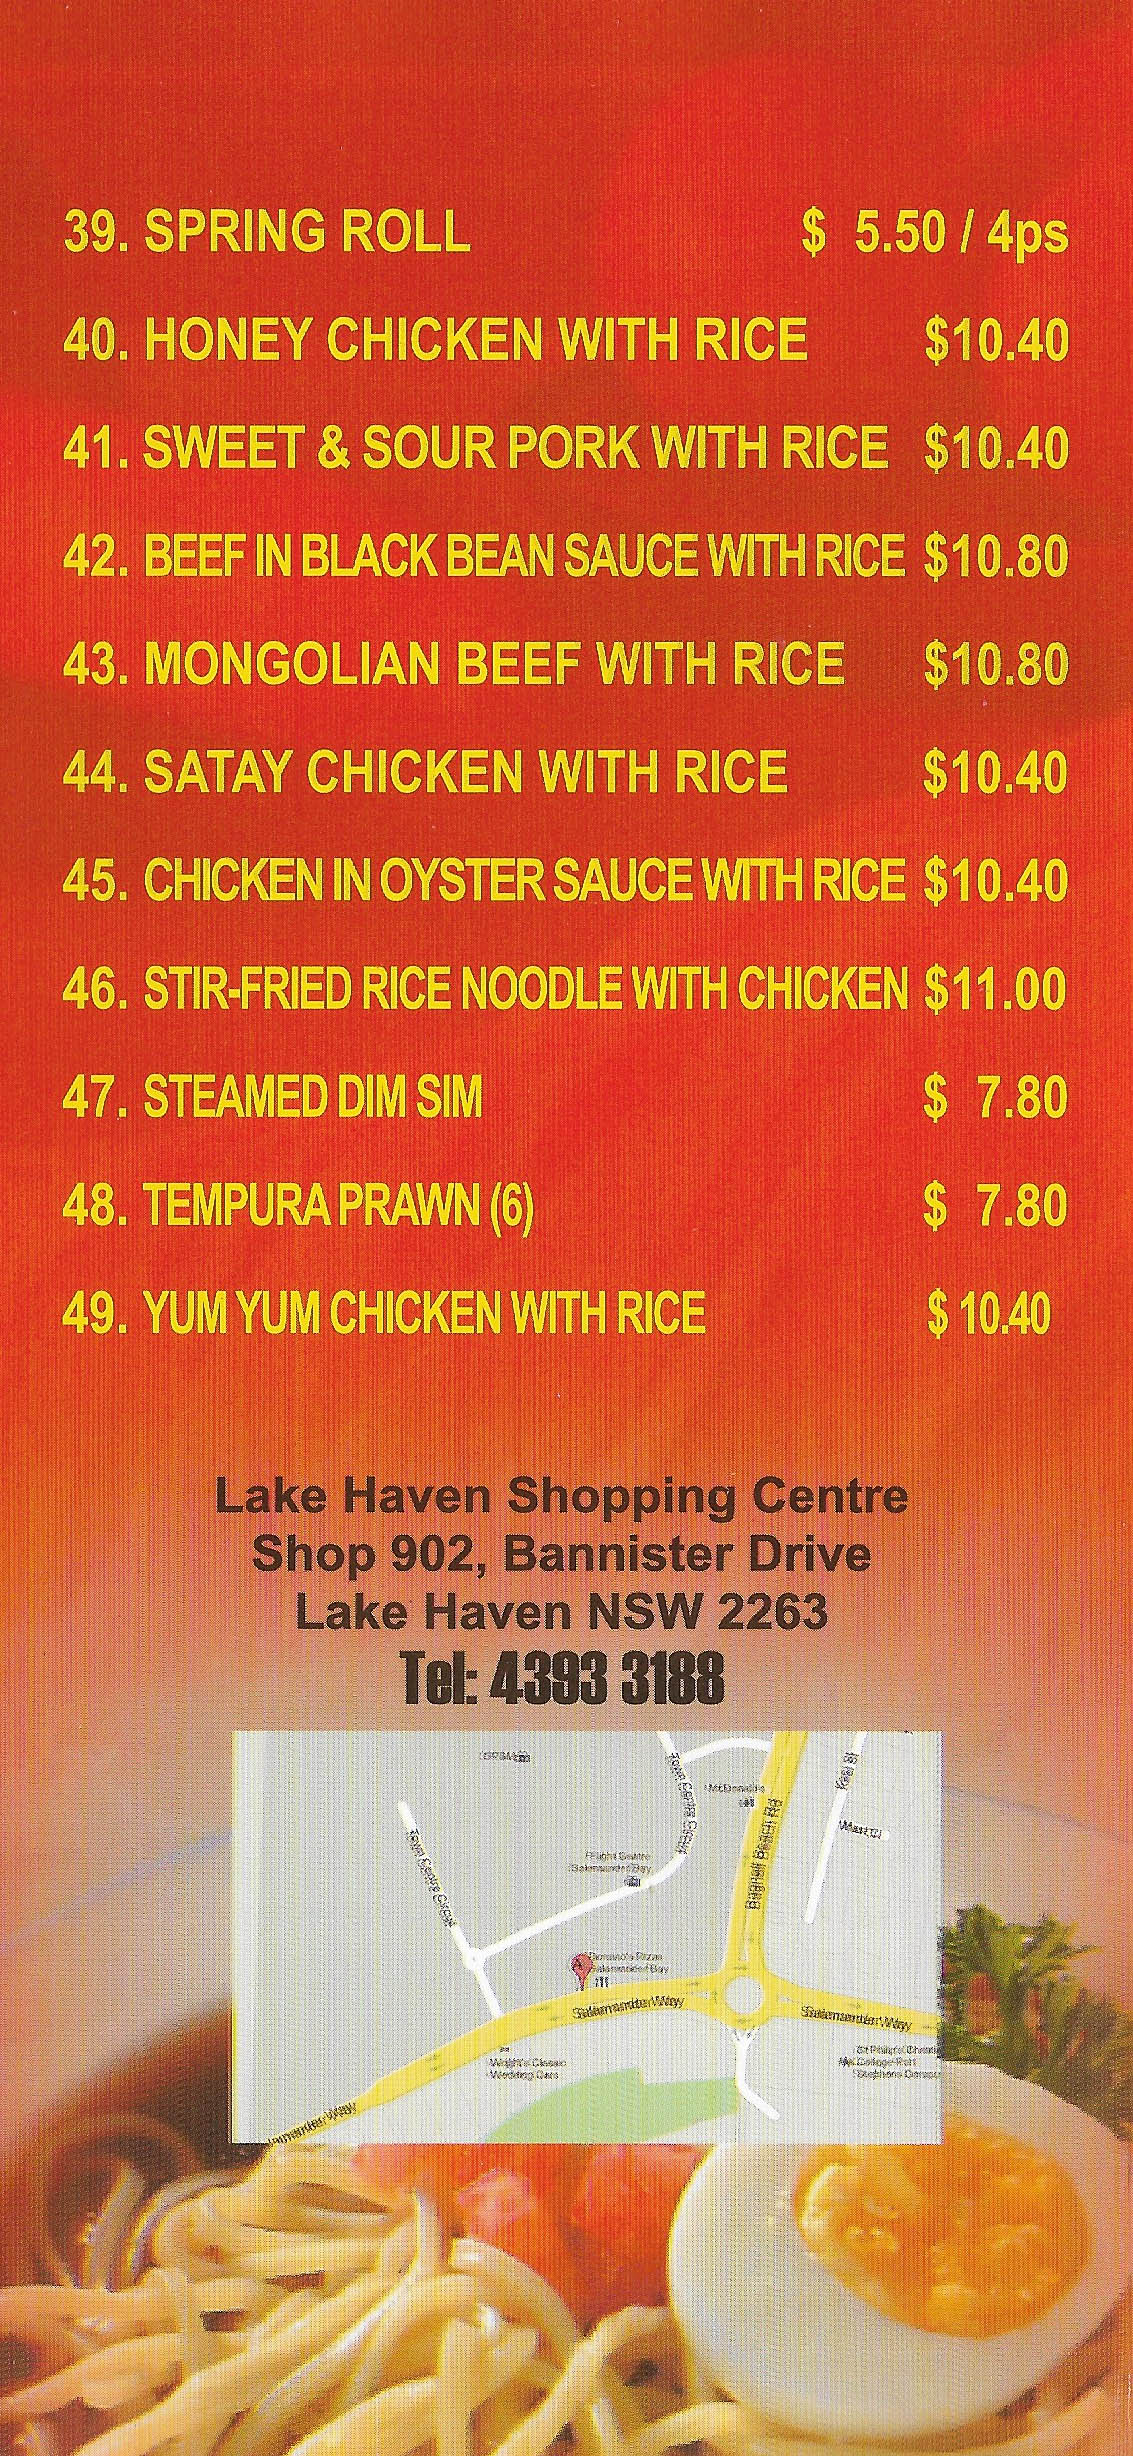 Master Noodle Lake Haven Central Coast - NSW | OBZ Online Business Zone